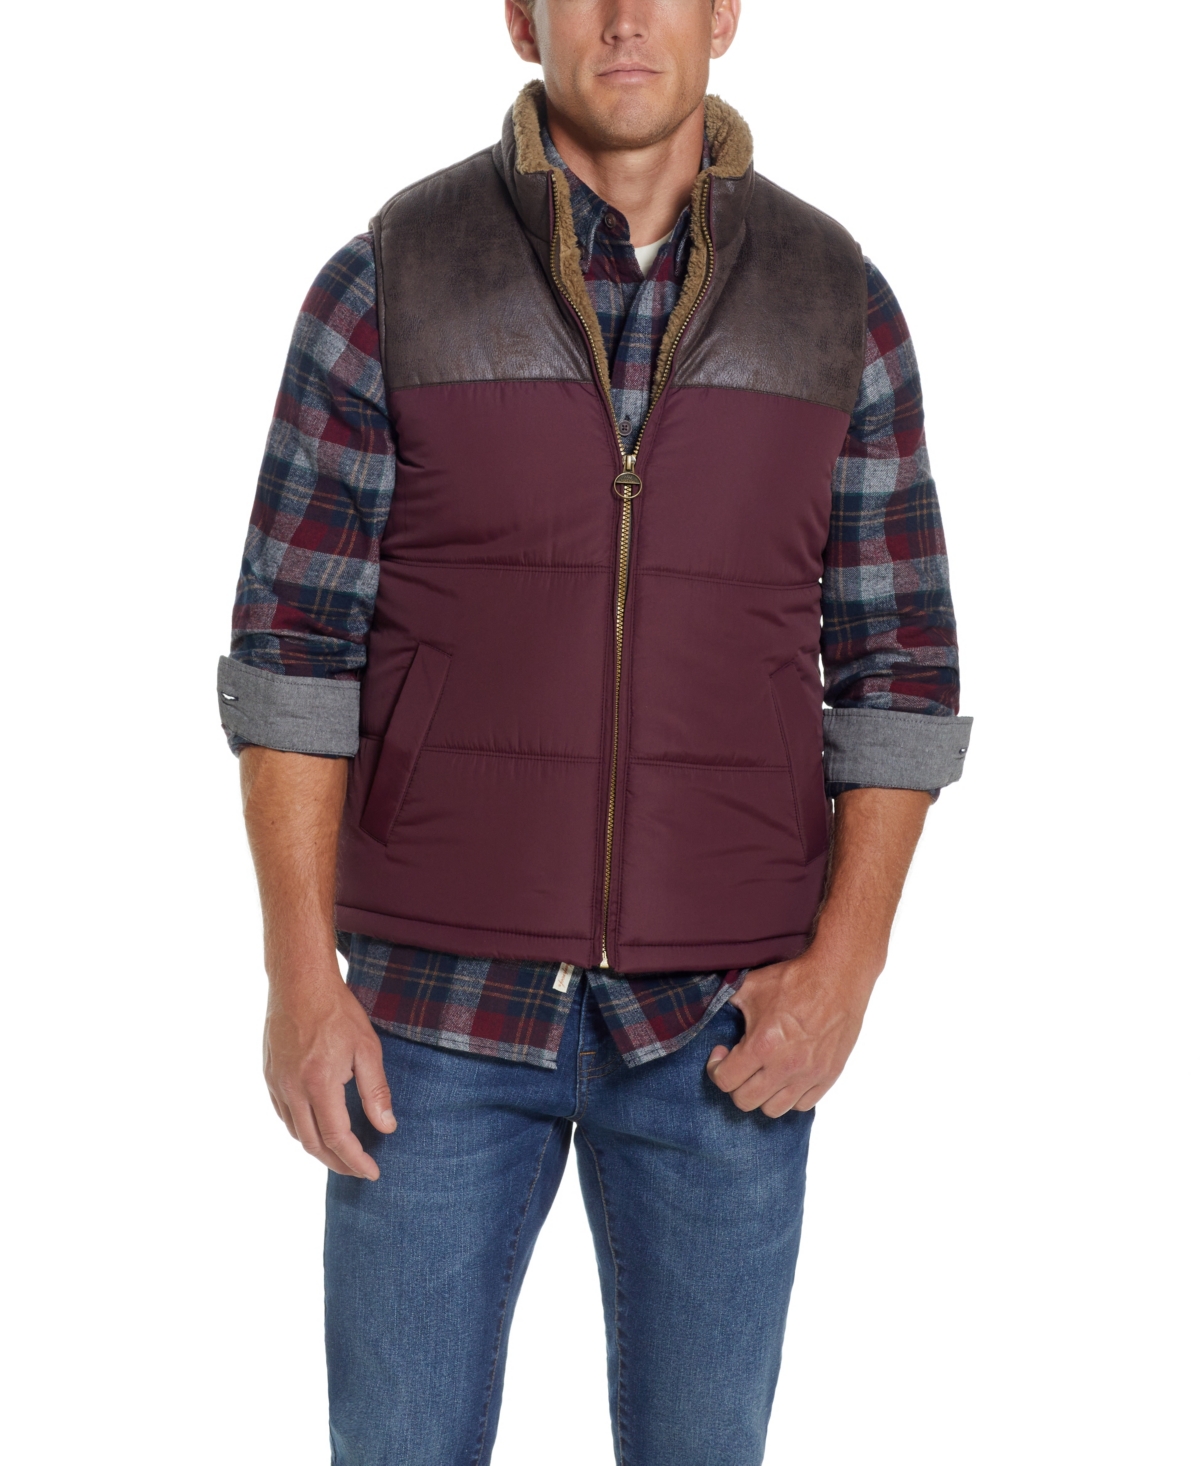 Men's Sherpa Lined with Faux Leather Detailing Vest - Port Royal